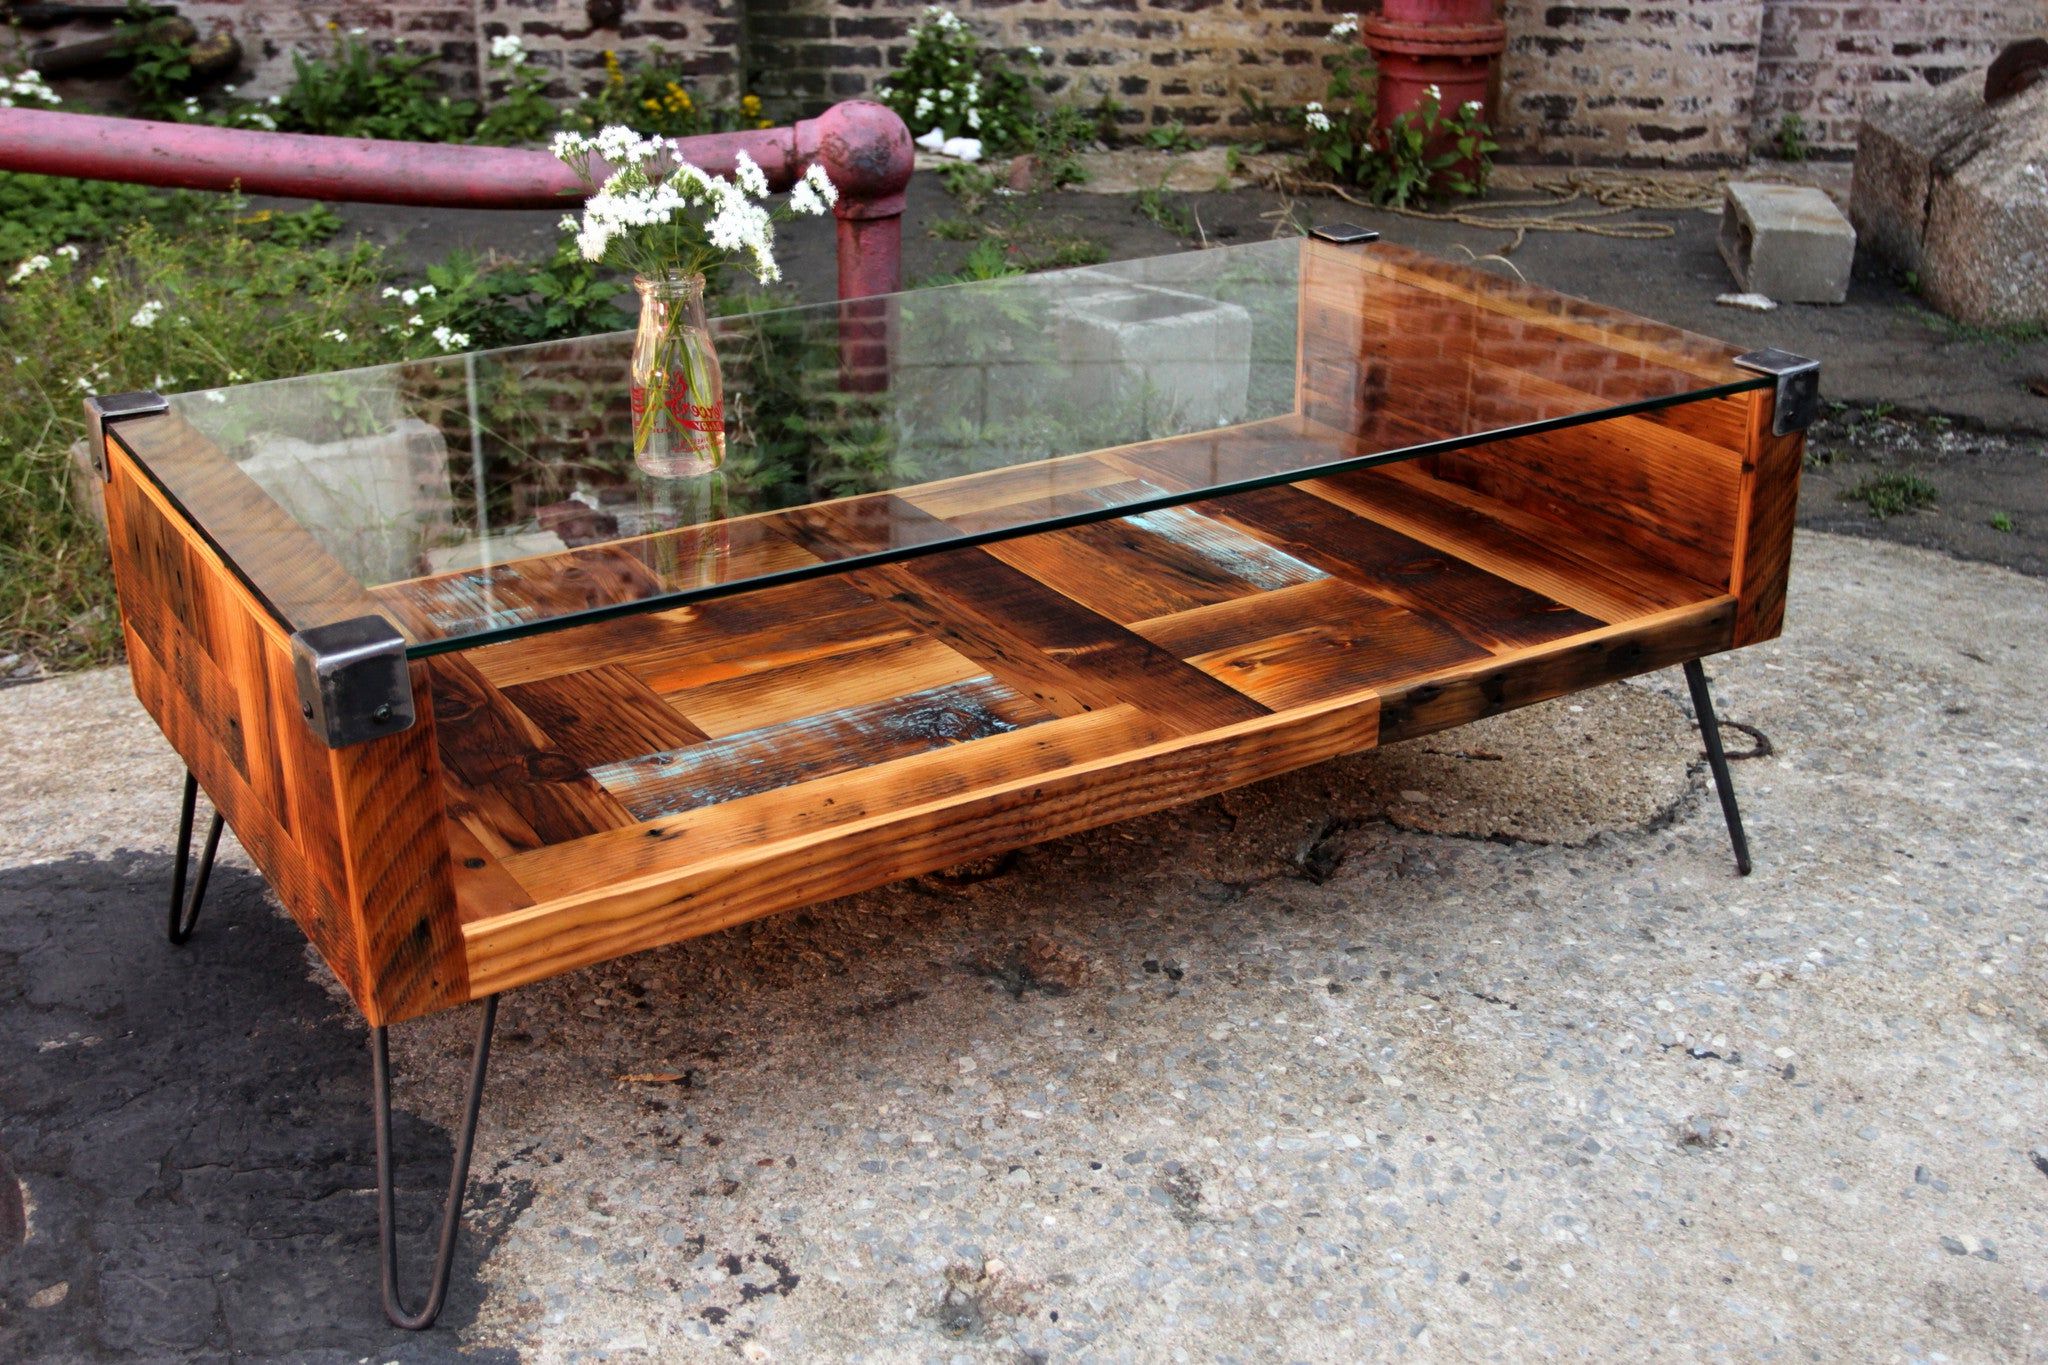 Wood Tempered Glass Top Coffee Tables Inside 2019 Tempered Glass Coffee Table – Recycled Brooklyn (View 7 of 15)